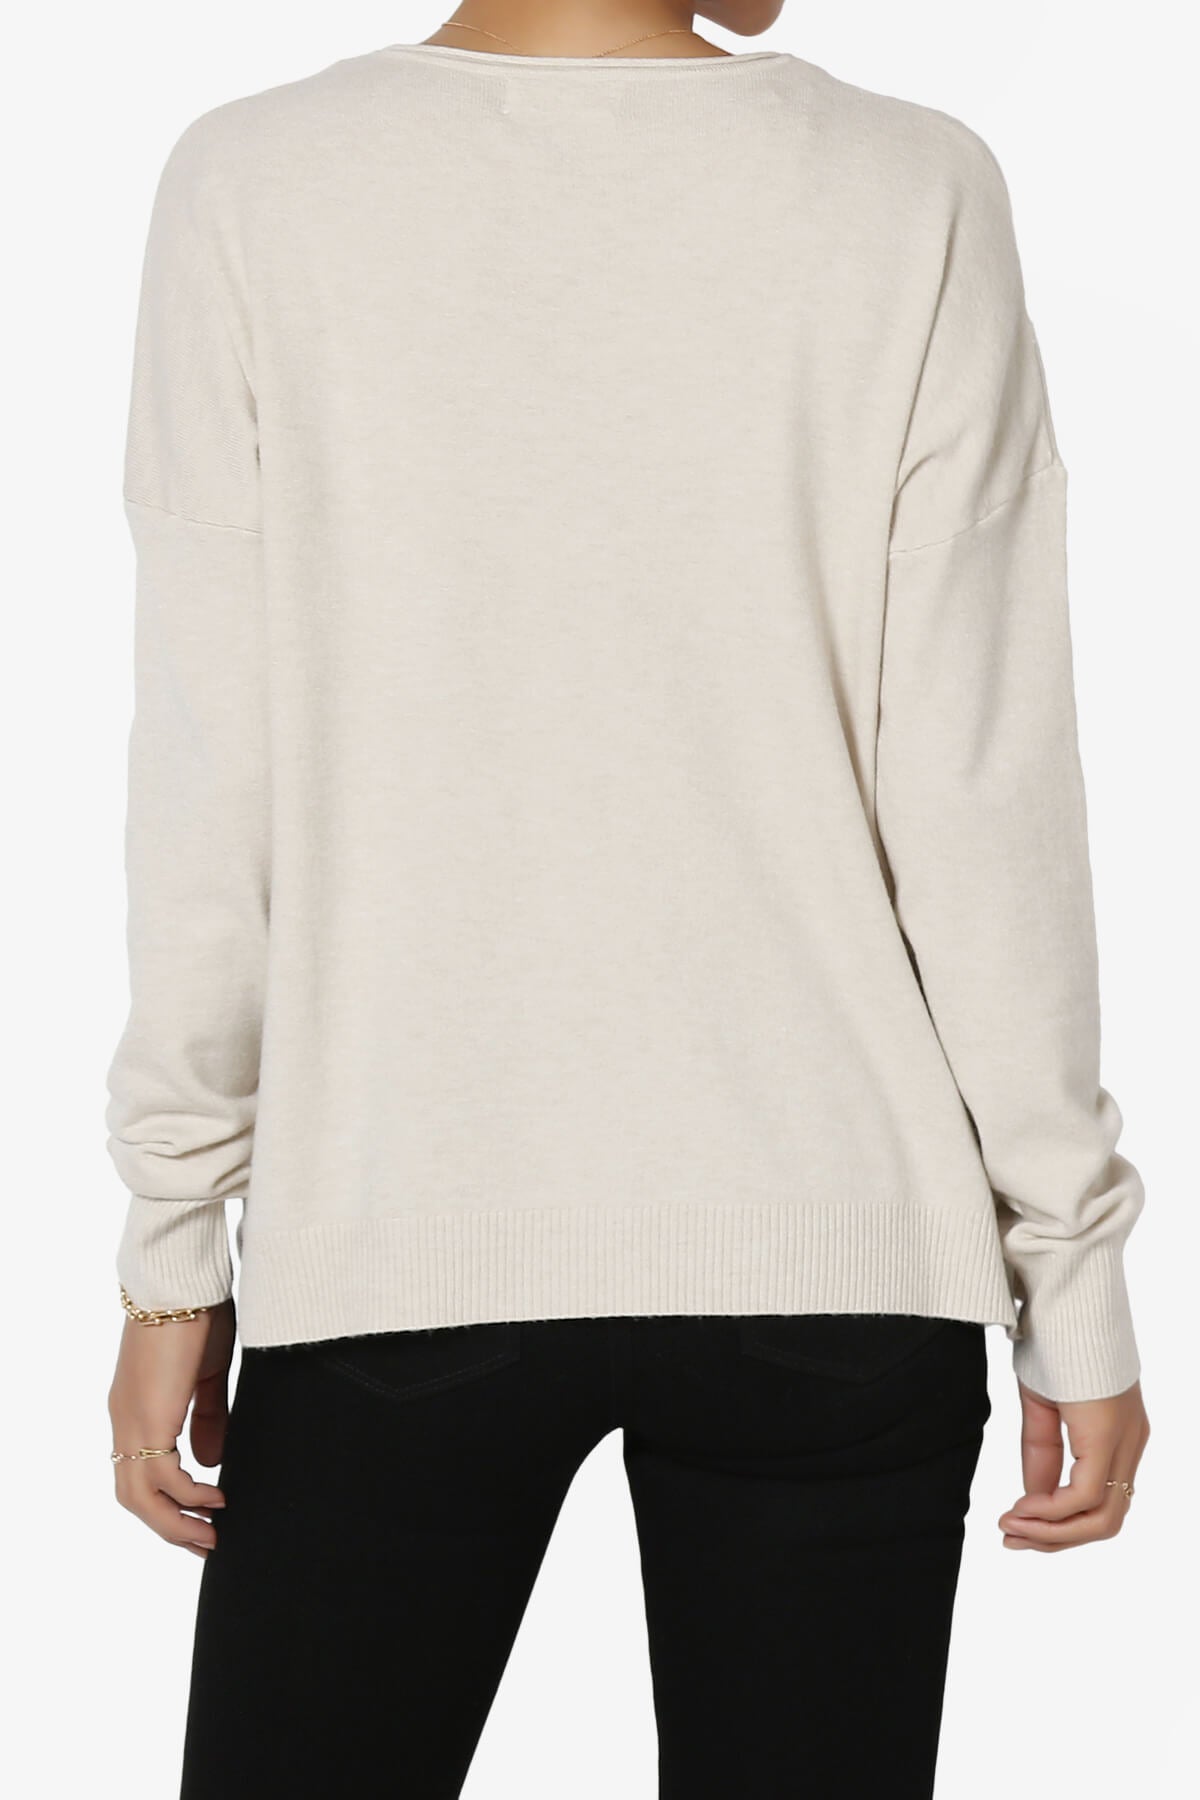 Carolina Long Sleeve Relaxed Fit Knit Top SAND BEIGE_2